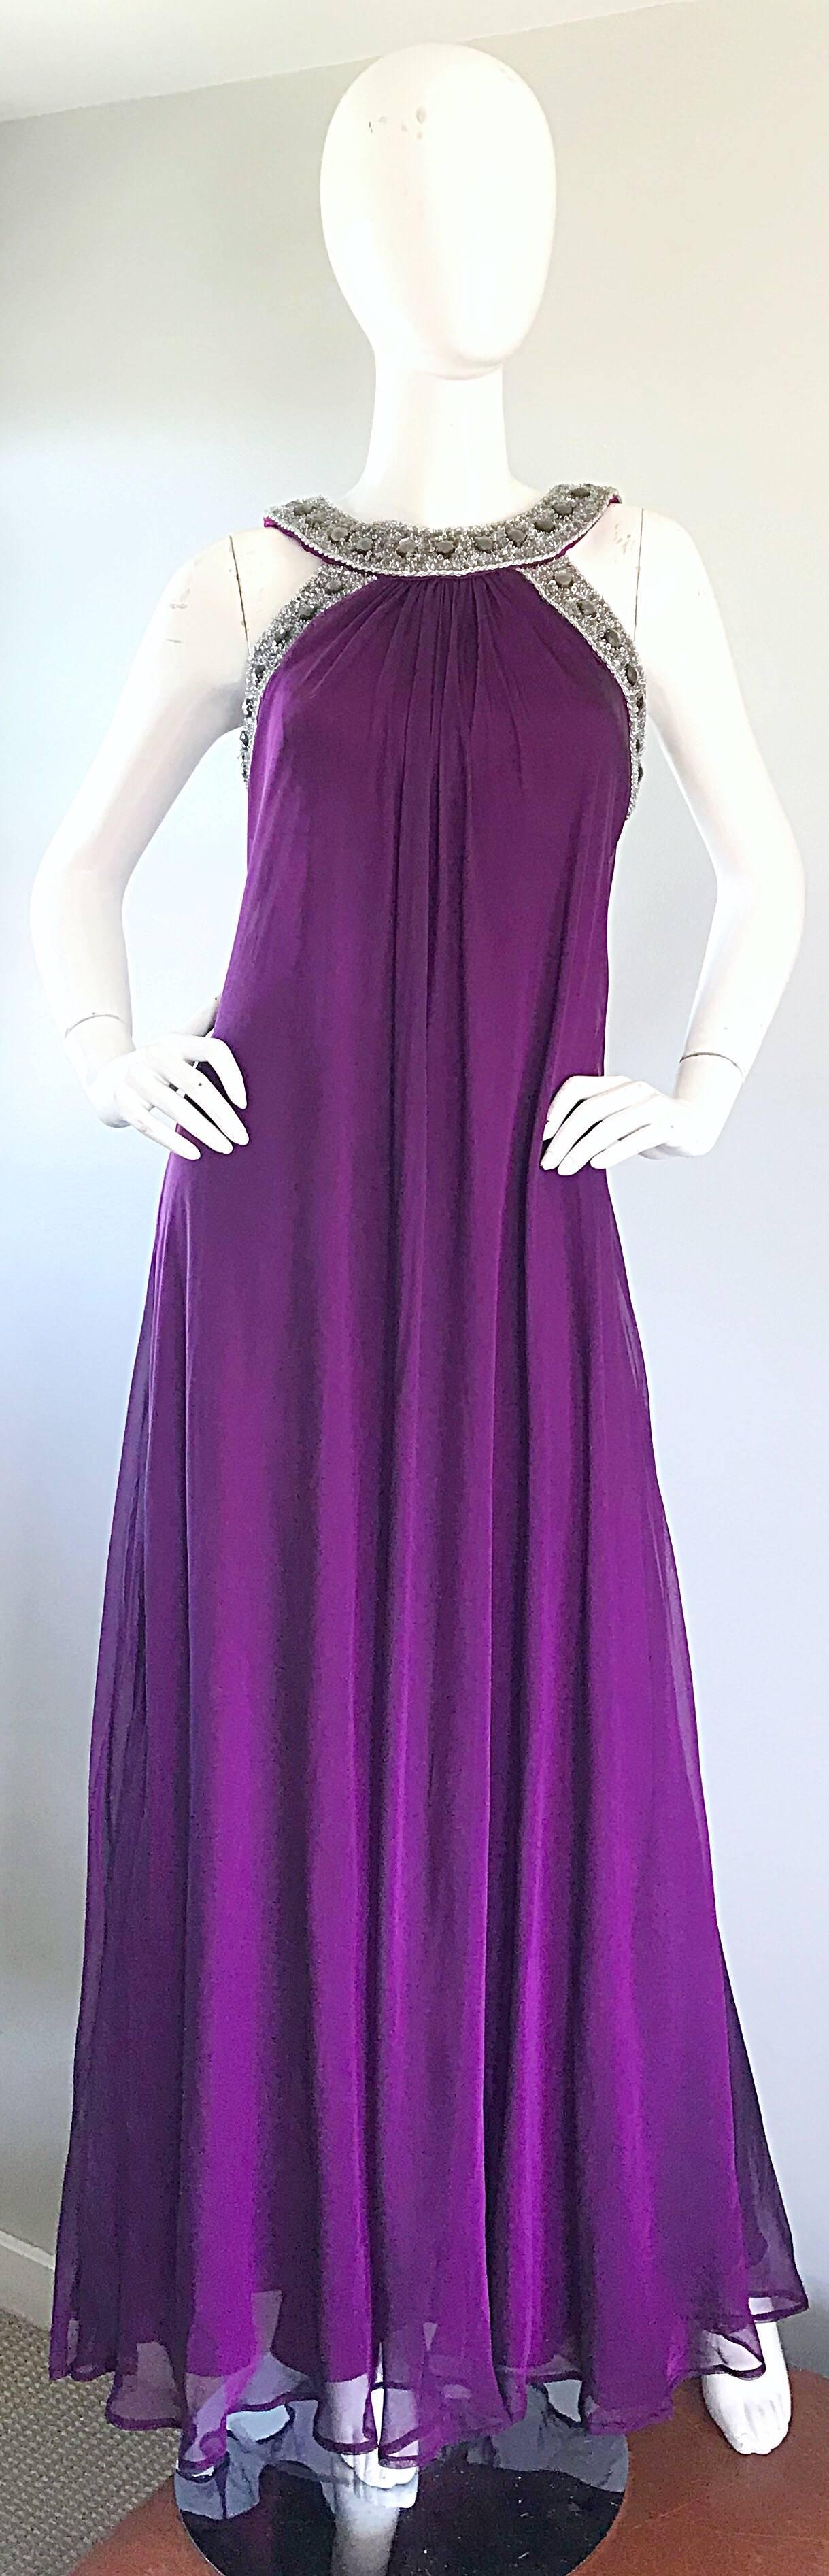 Stunning 90s BADGLEY MISCHKA purple silk chiffon Grecian inspired empire shaped evening dress! Features hundreds of hand-sewn rhinestones and silver beads along the neck and arms. Layers of luxurious silk chiffon look amazing on! Hidden zipper up